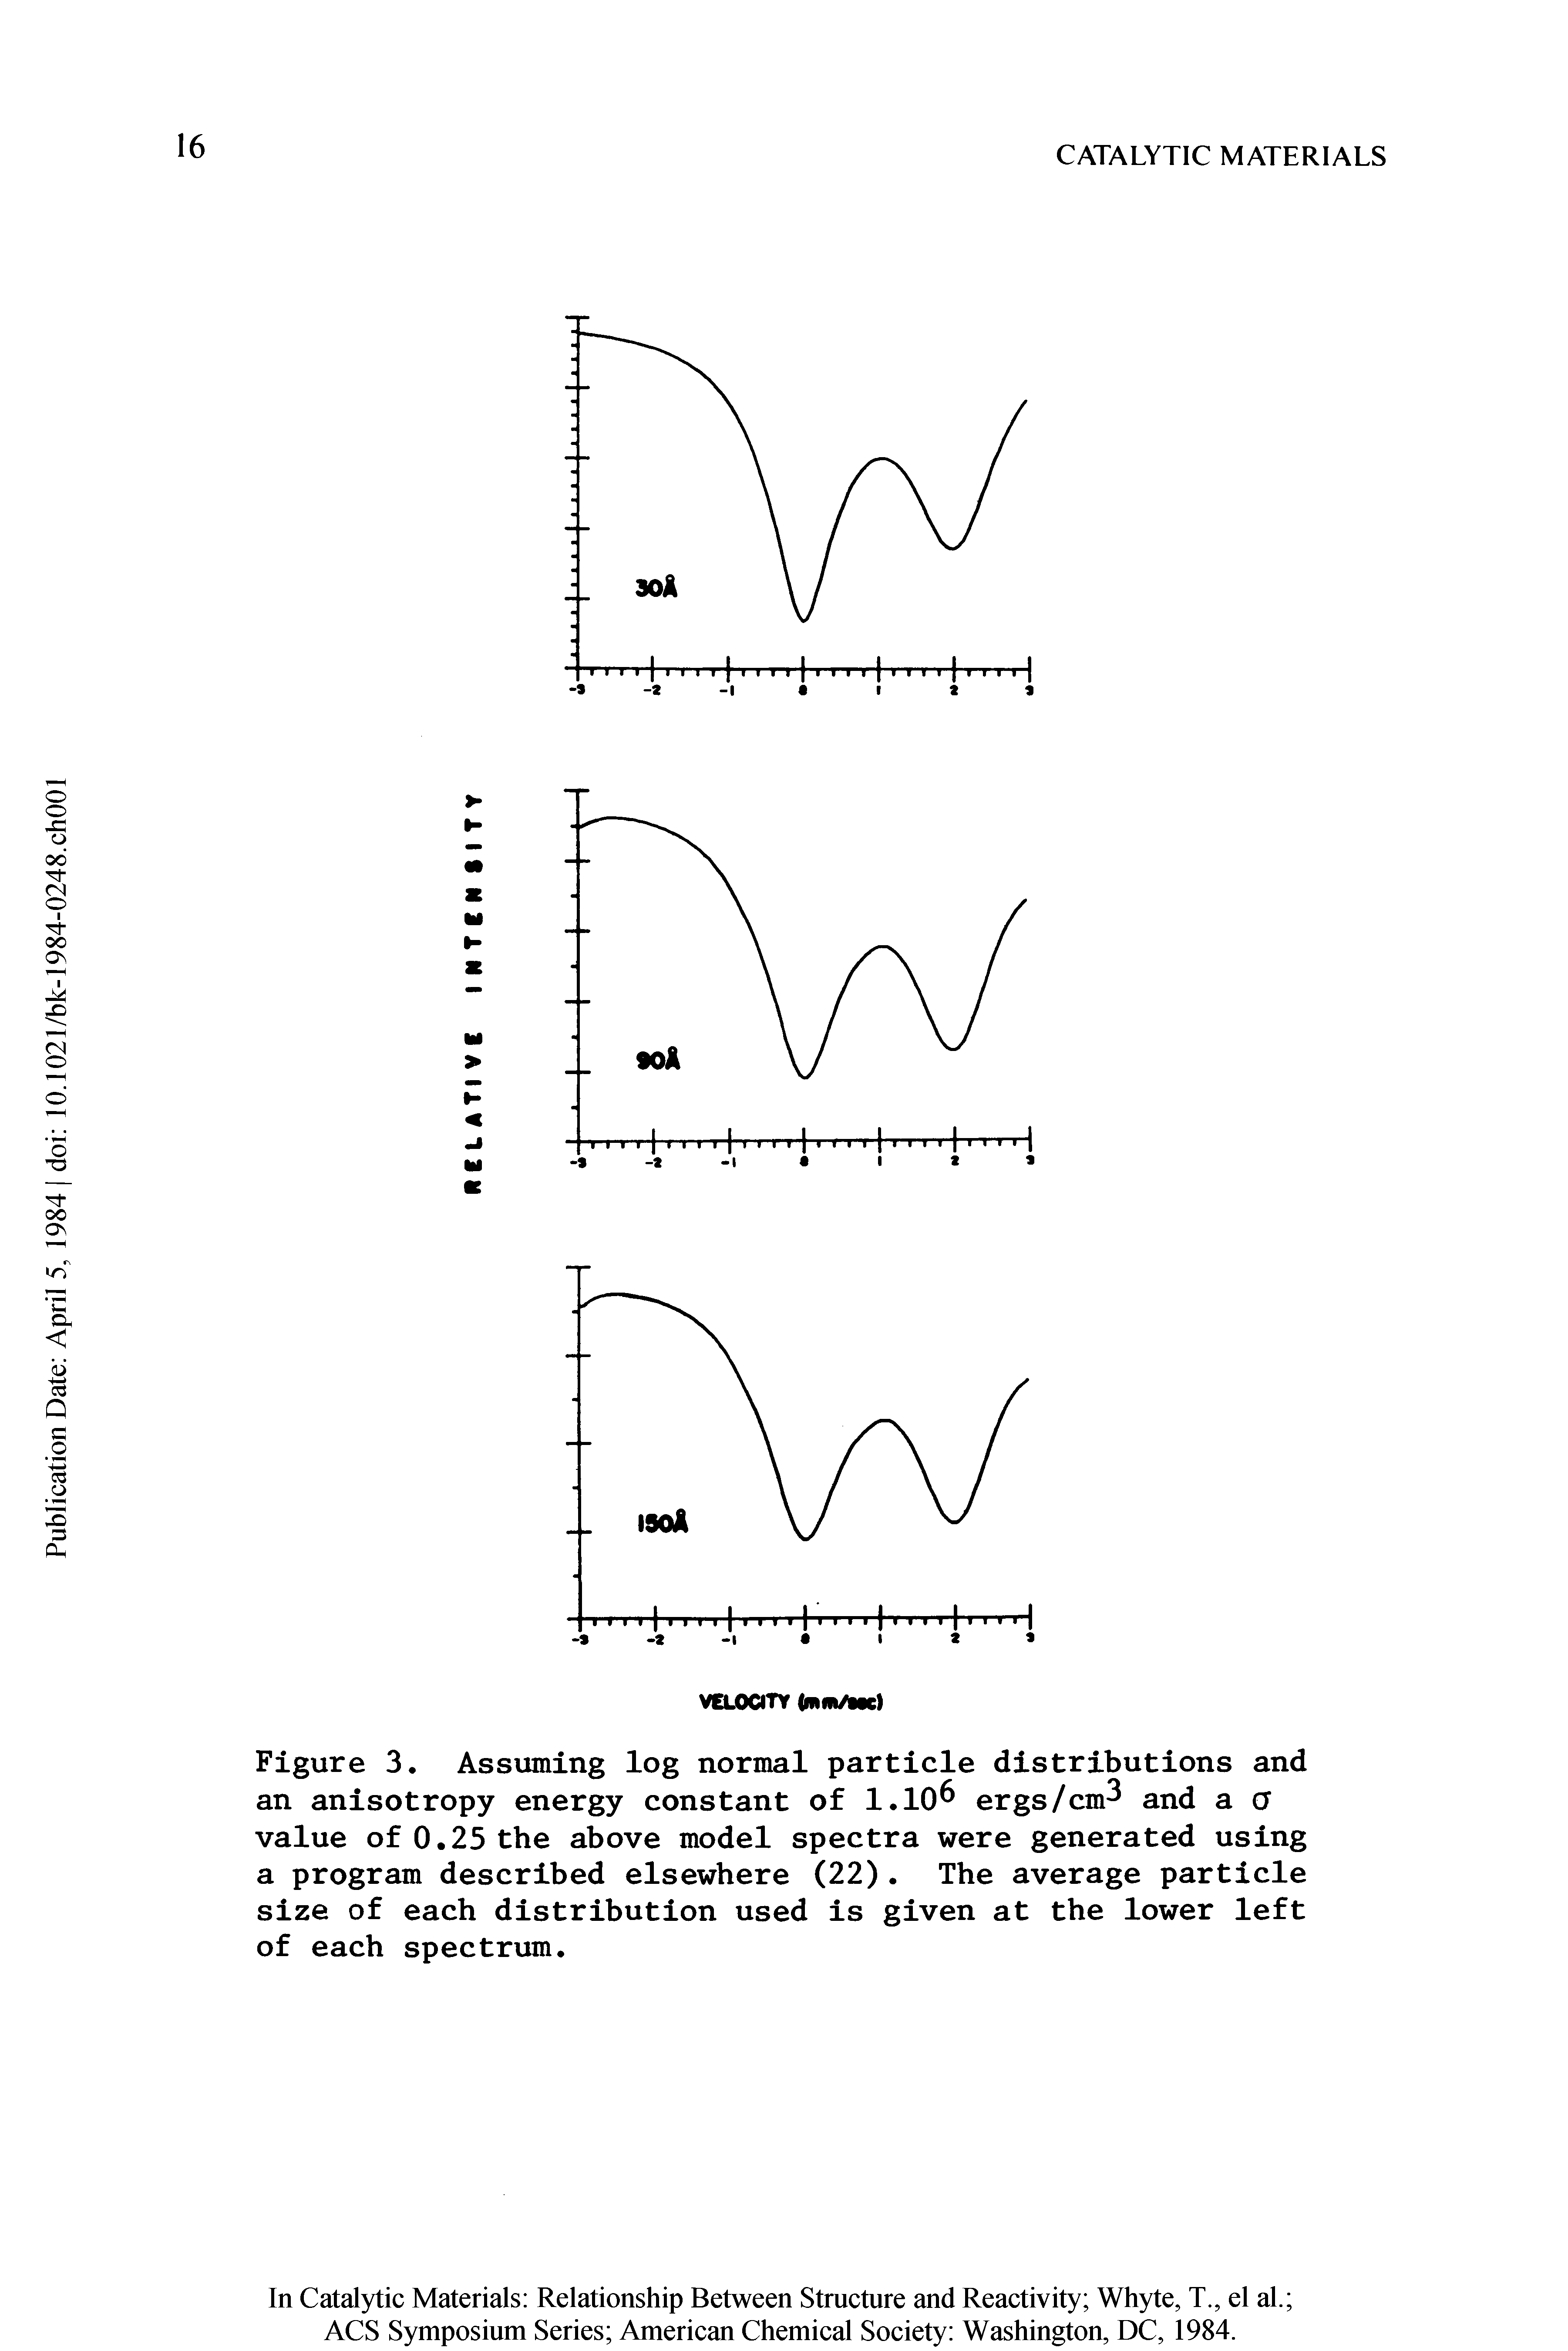 Figure 3. Assuming log normal particle distributions and an anisotropy energy constant of 1.10 ergs/cm and a o value of 0.25 the above model spectra were generated using a program described elsewhere (22). The average particle size of each distribution used is given at the lower left of each spectrum.